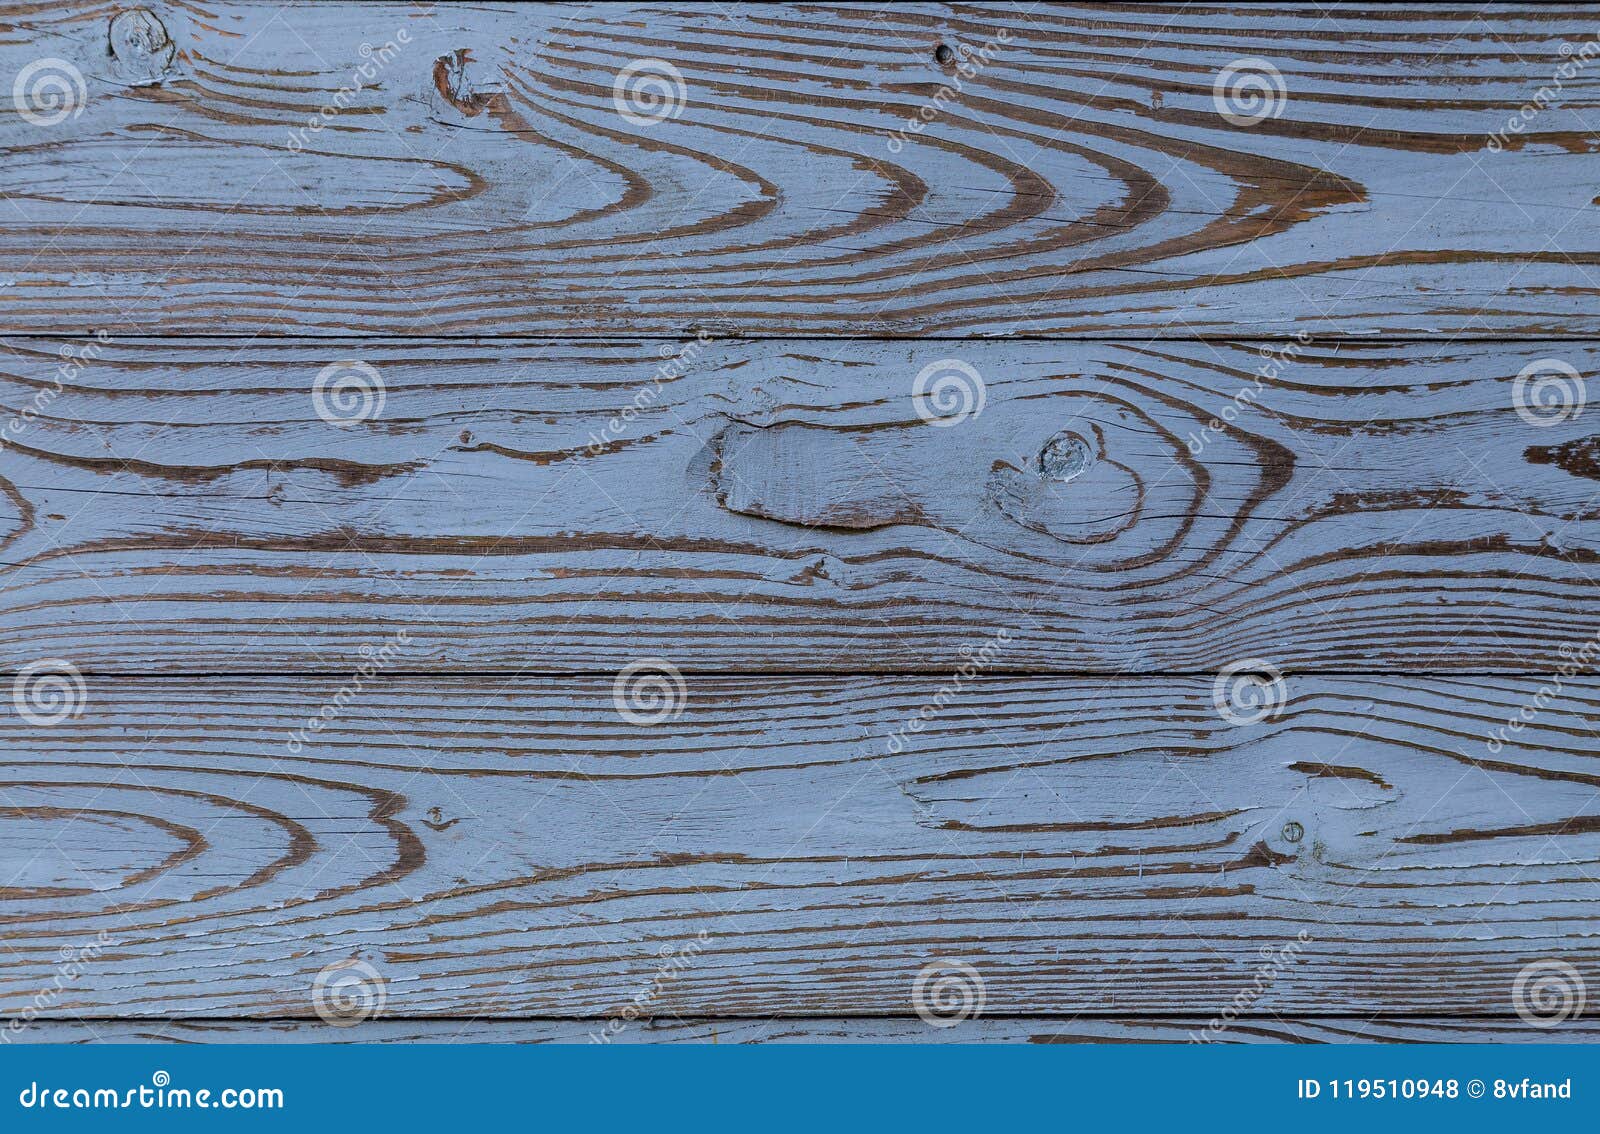 blue wooden fond as background structure